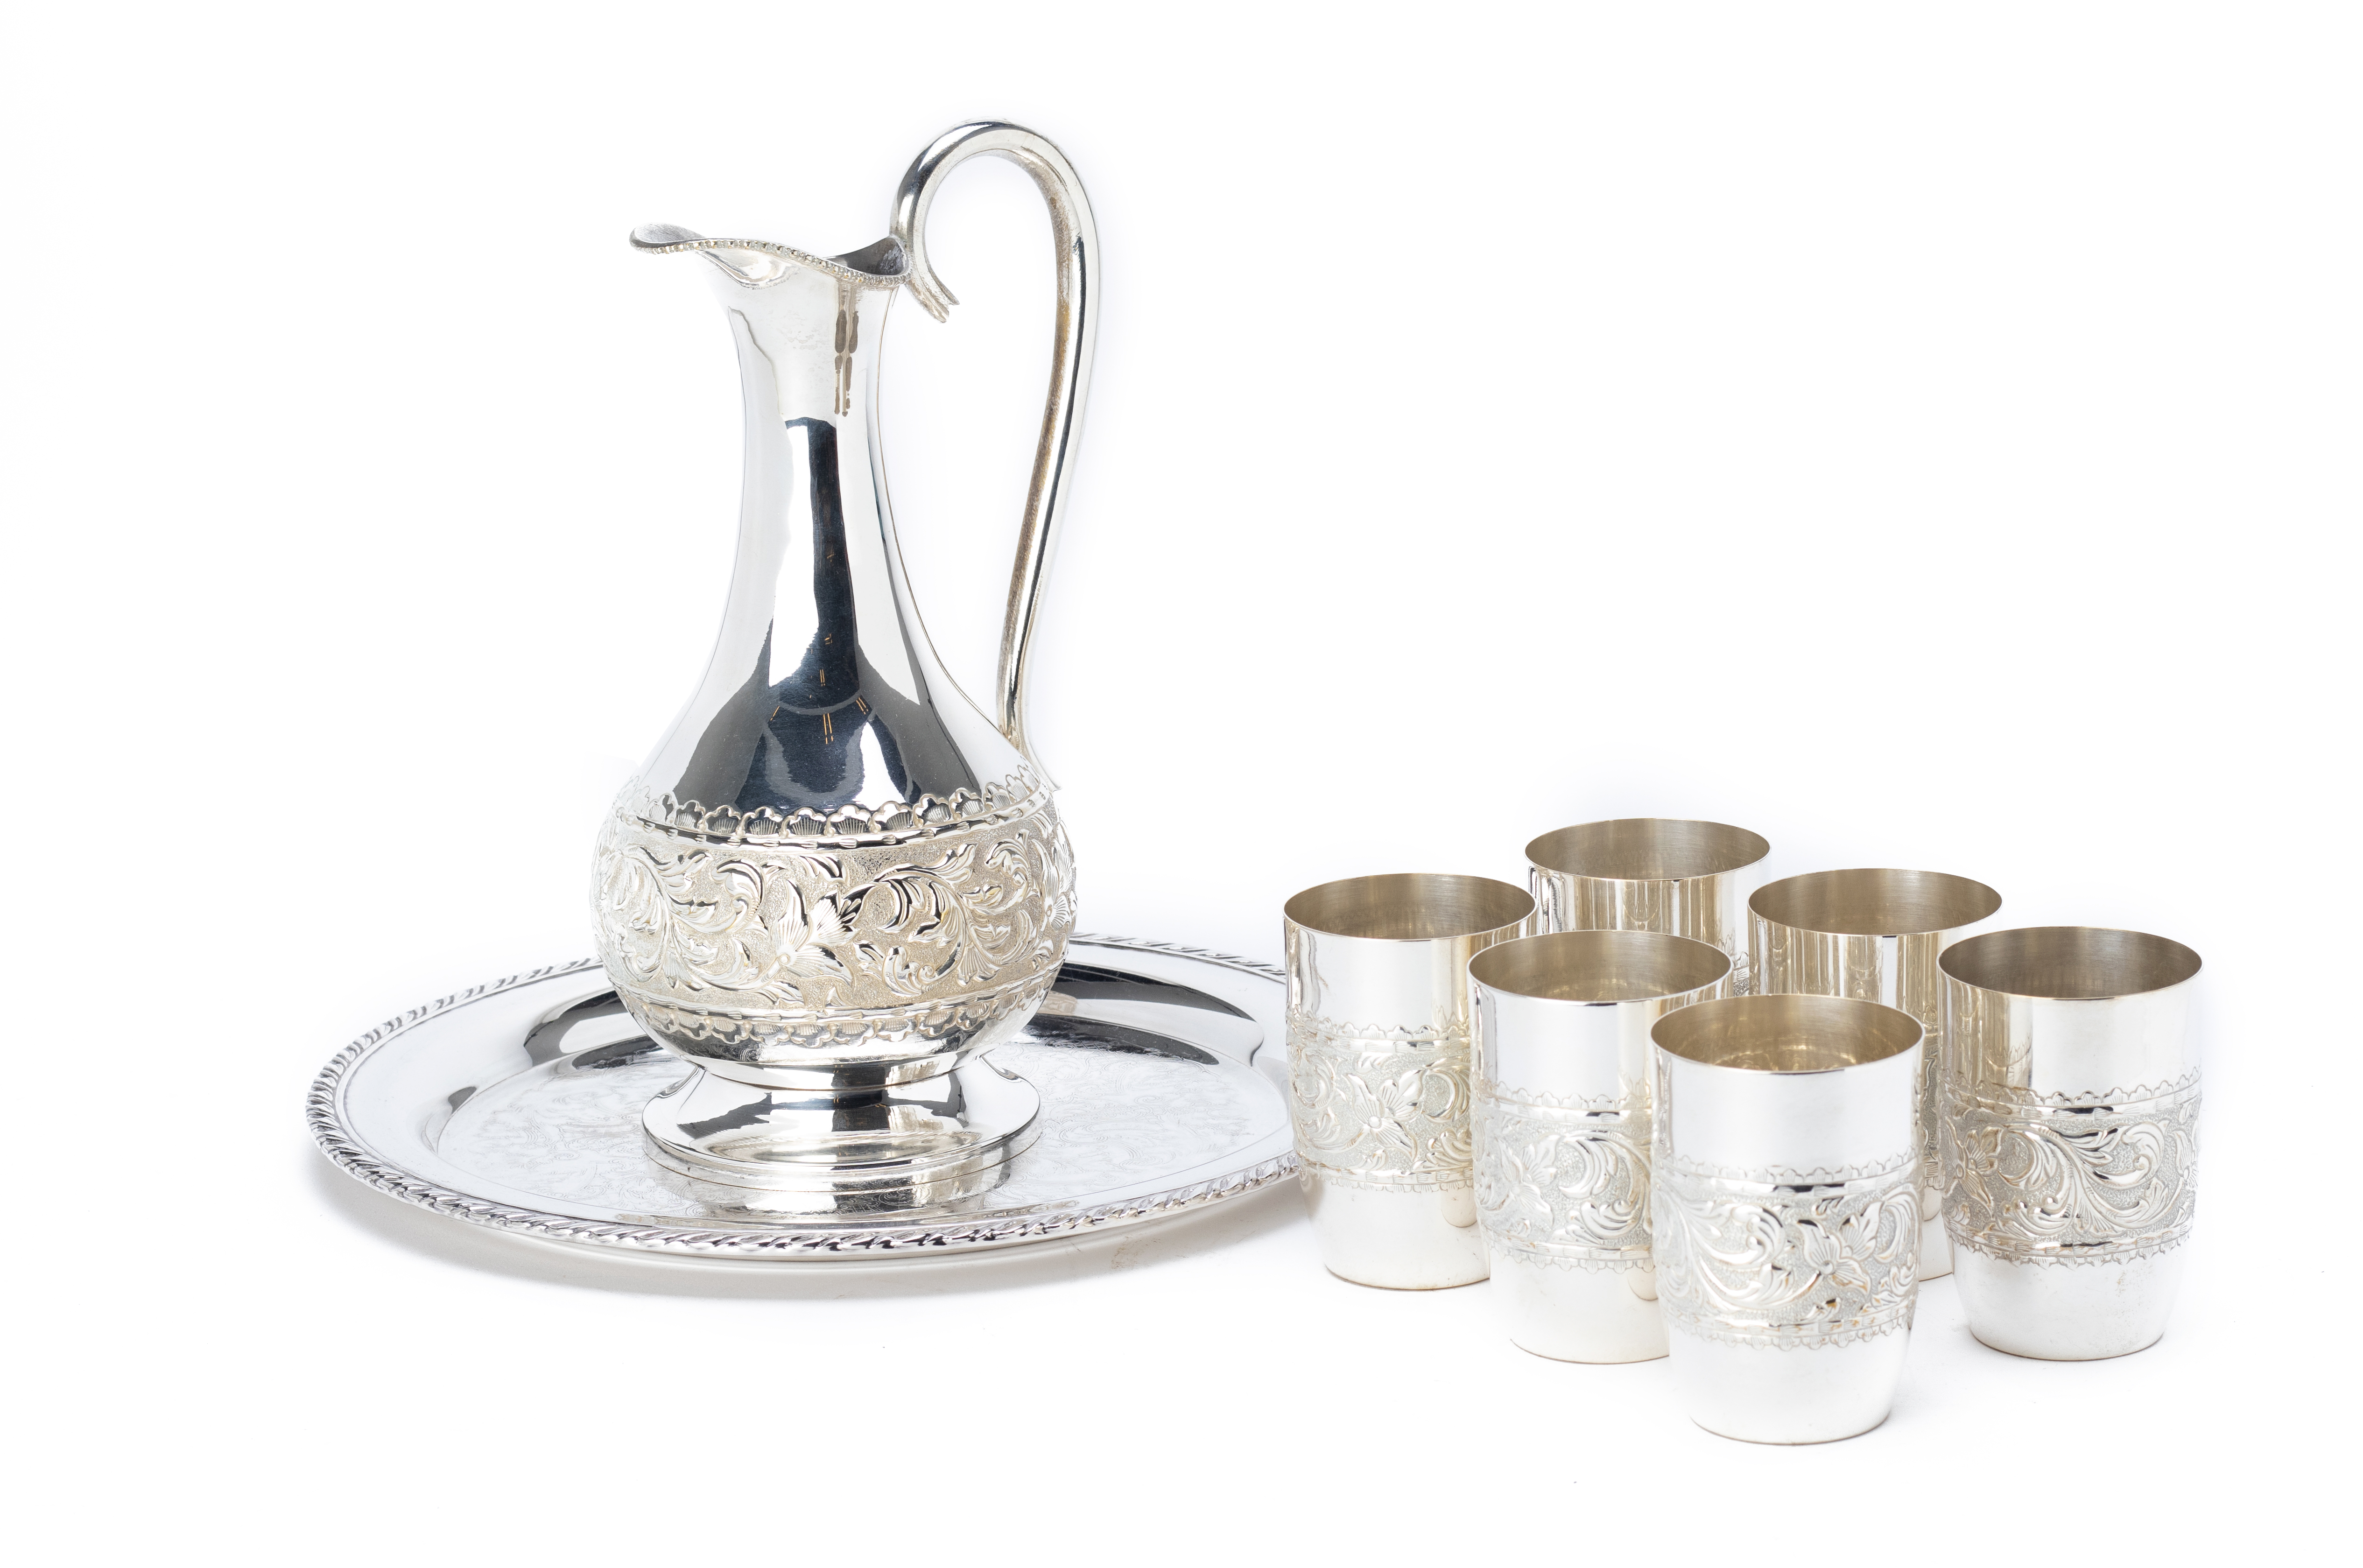 A SILVER PLATED PITCHER AND SET OF BEAKERS